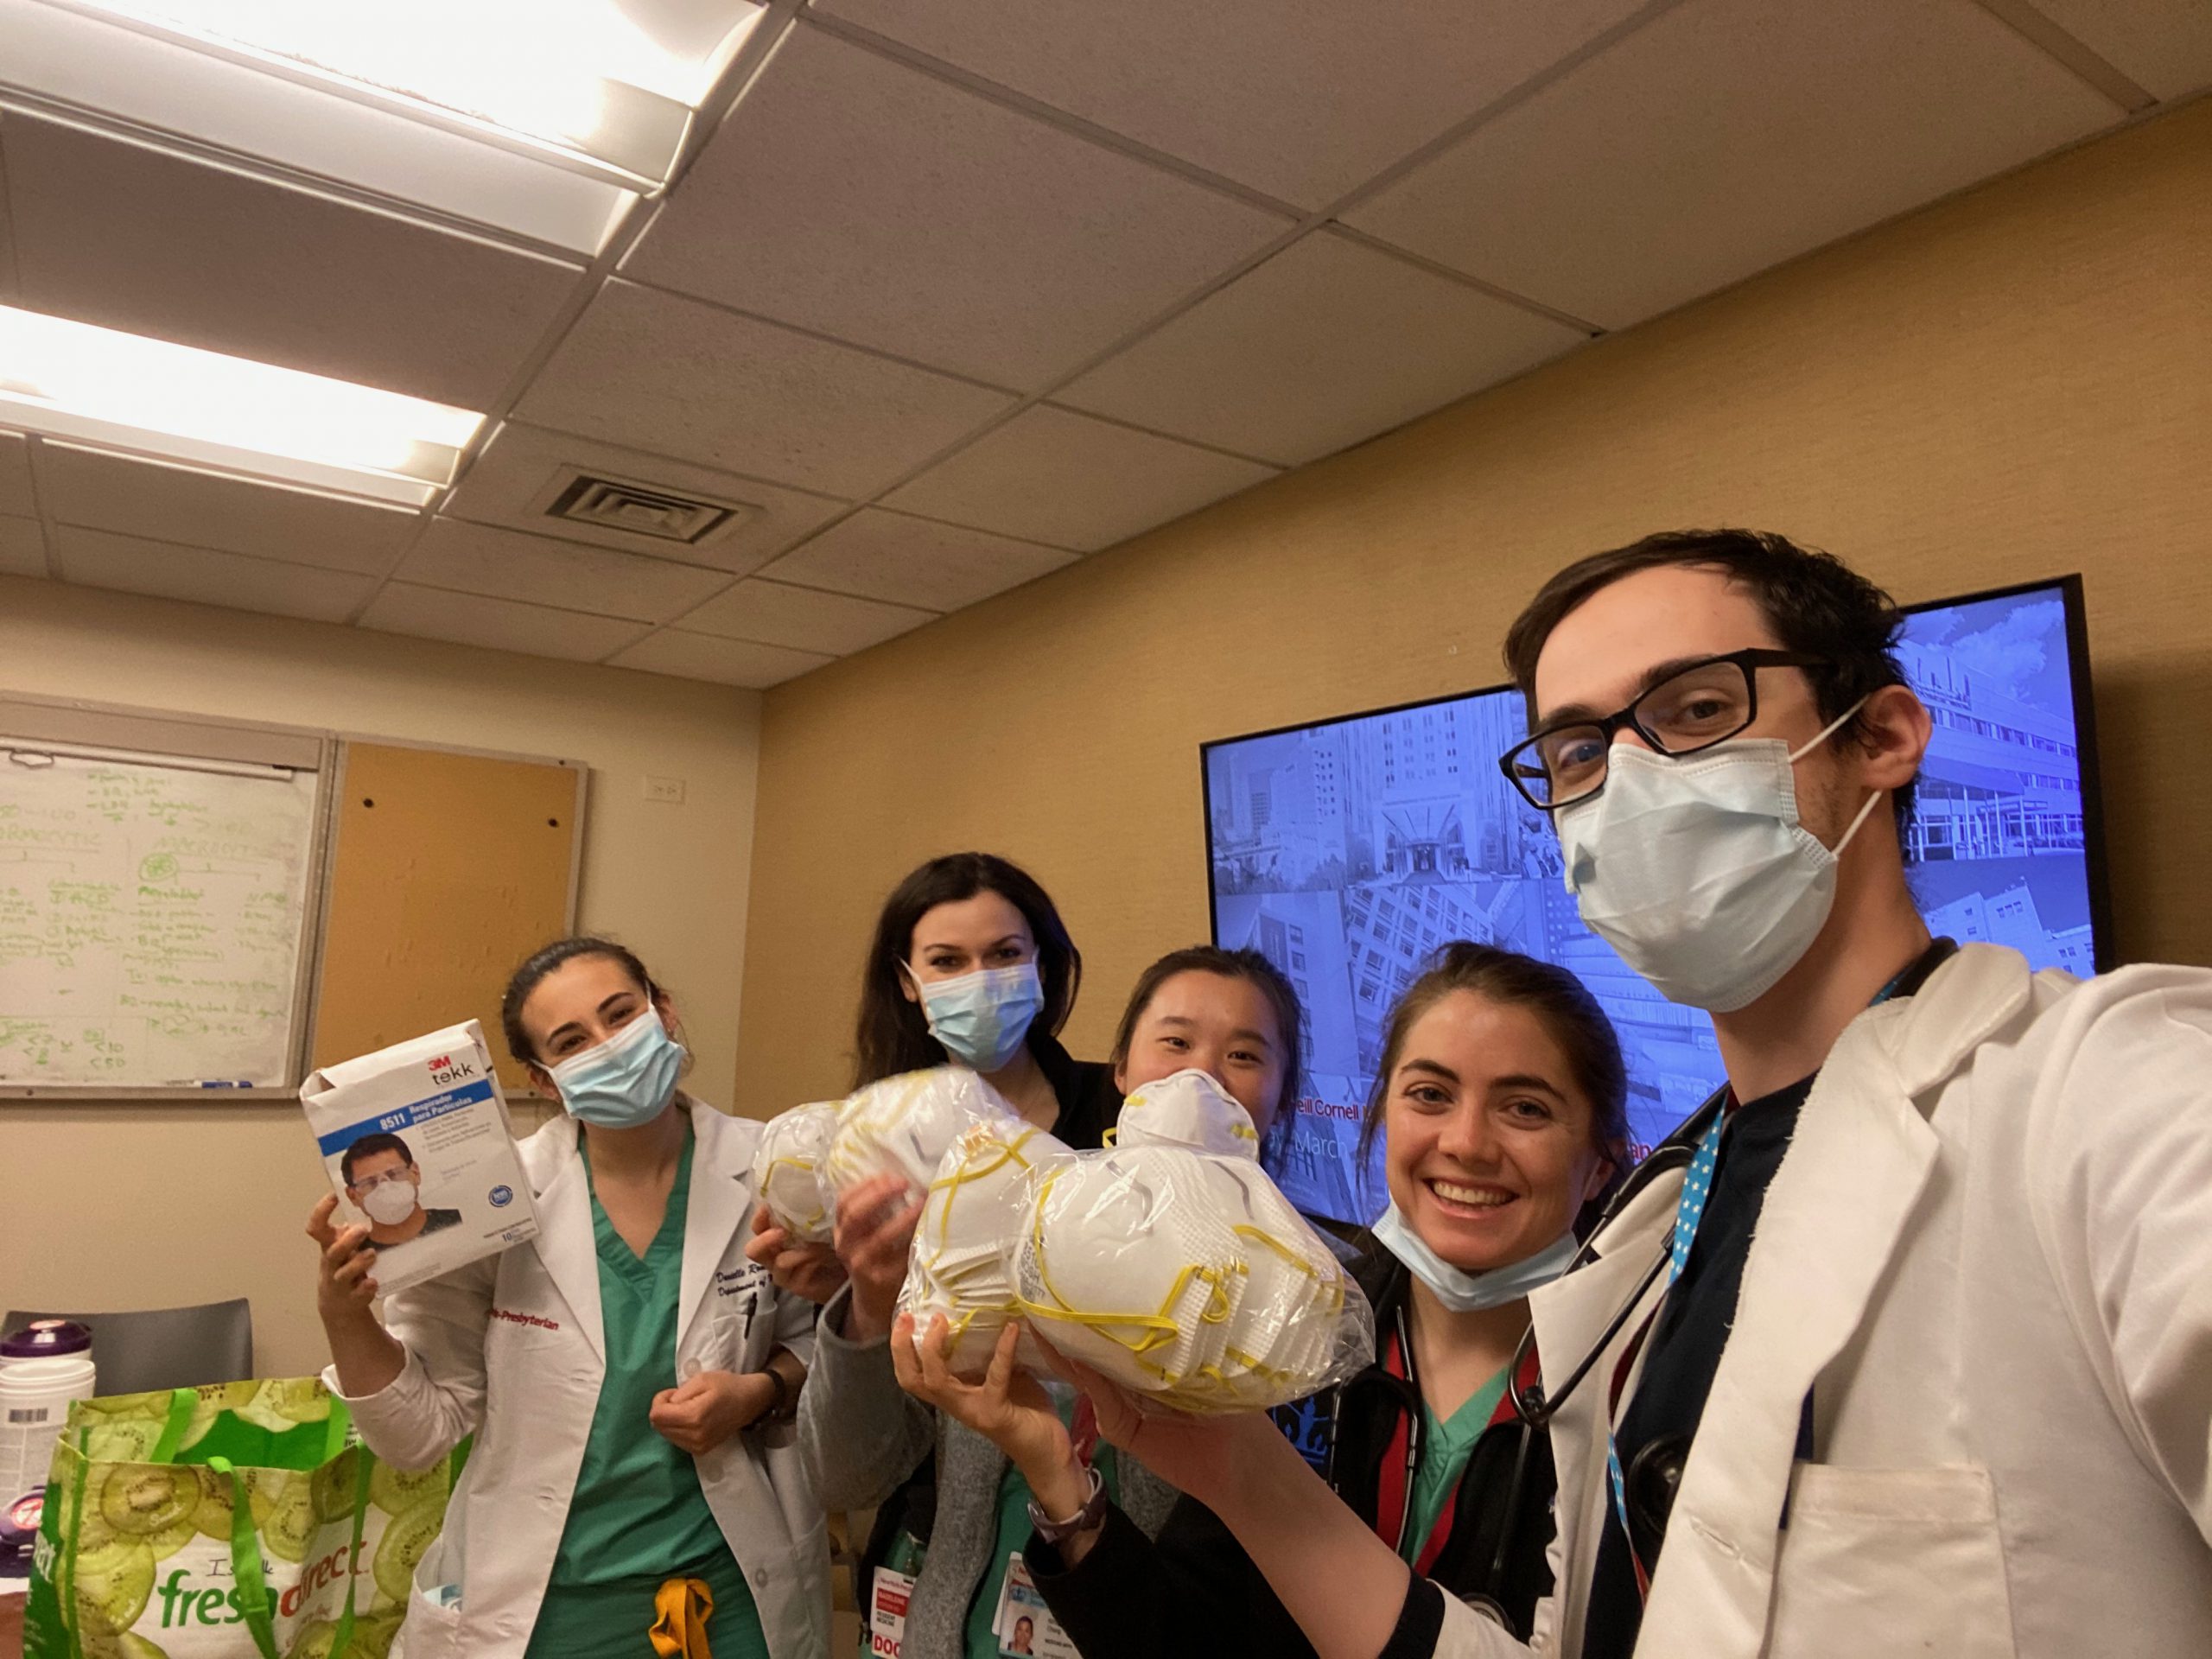 N95 Masks Used For Toxic Pollution Cleanup Donated To Hospitals Amidst Pandemic